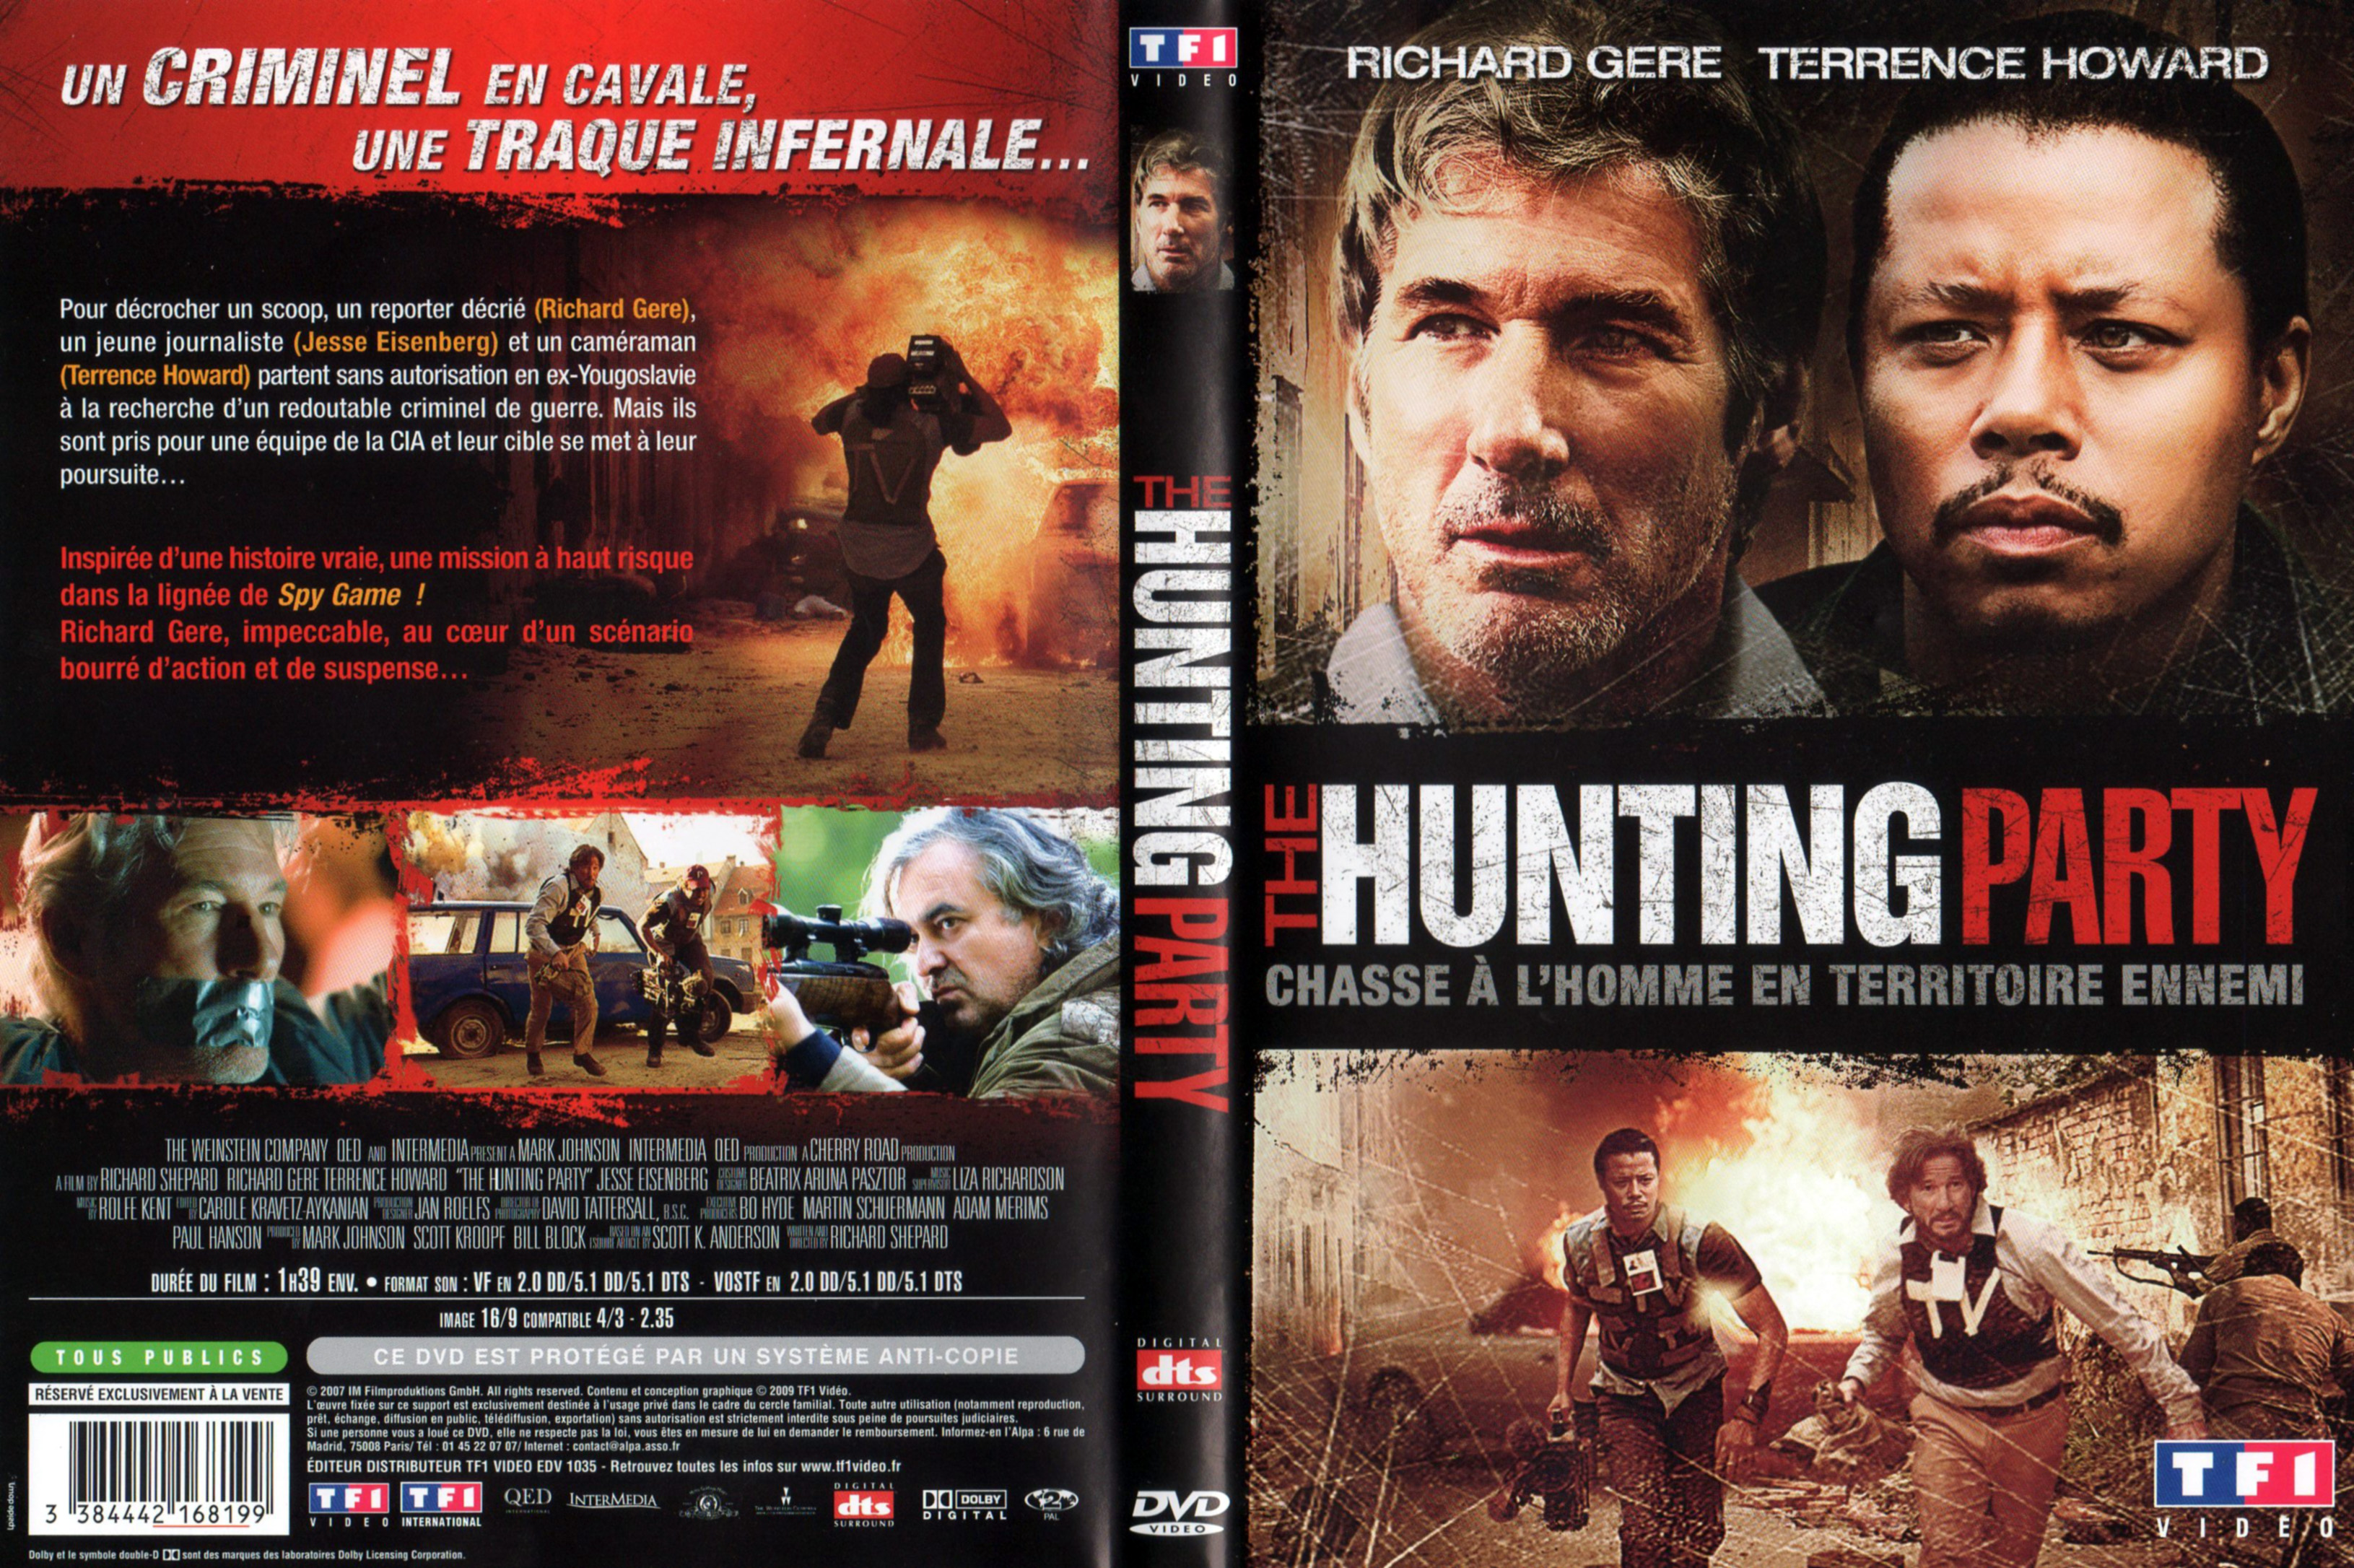 Jaquette DVD The hunting party